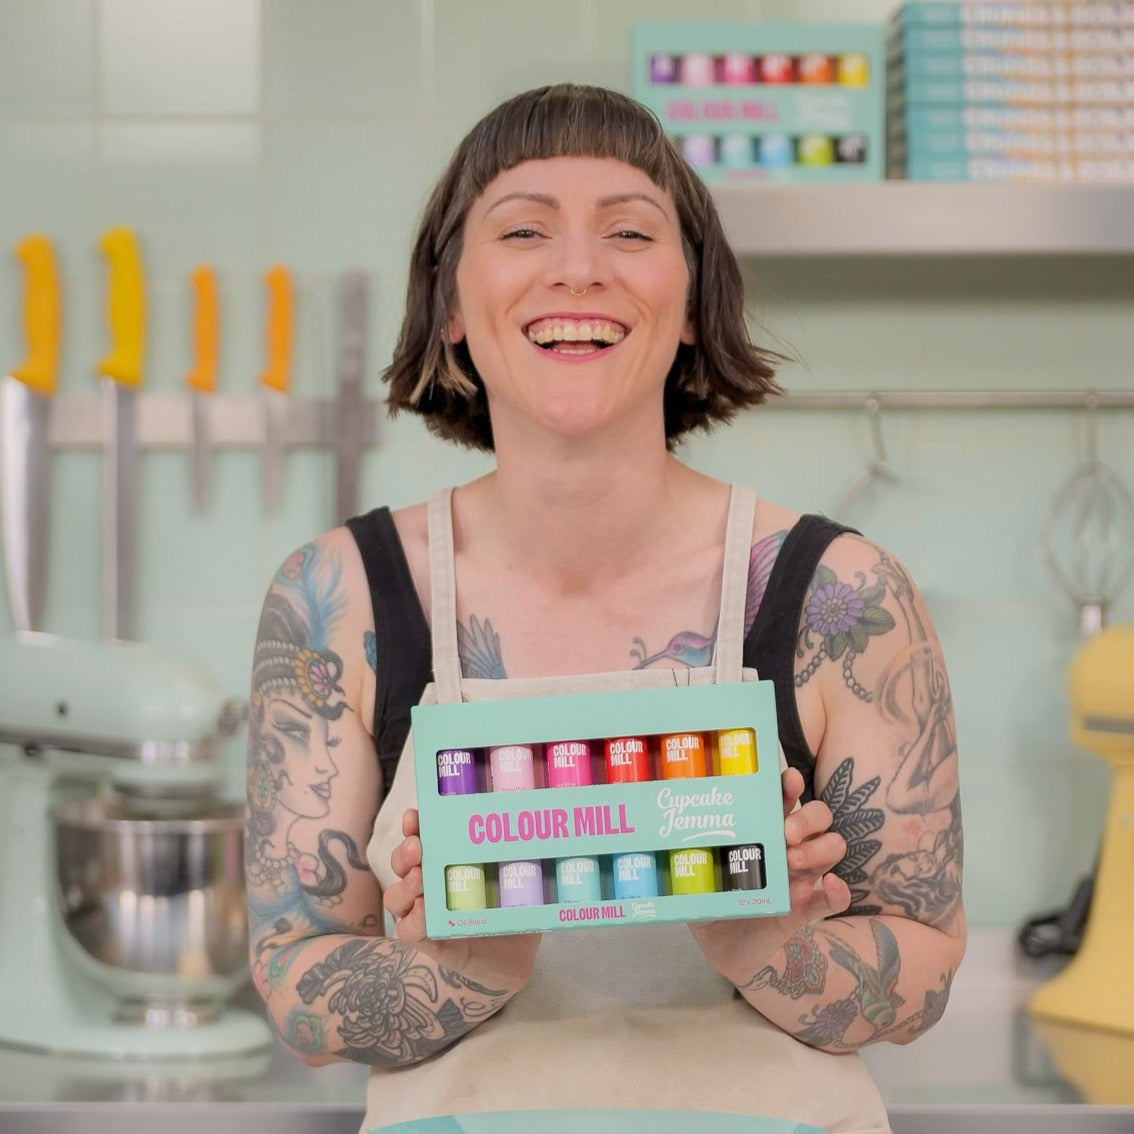 Cupcake Jemma x Colour Mill Pack